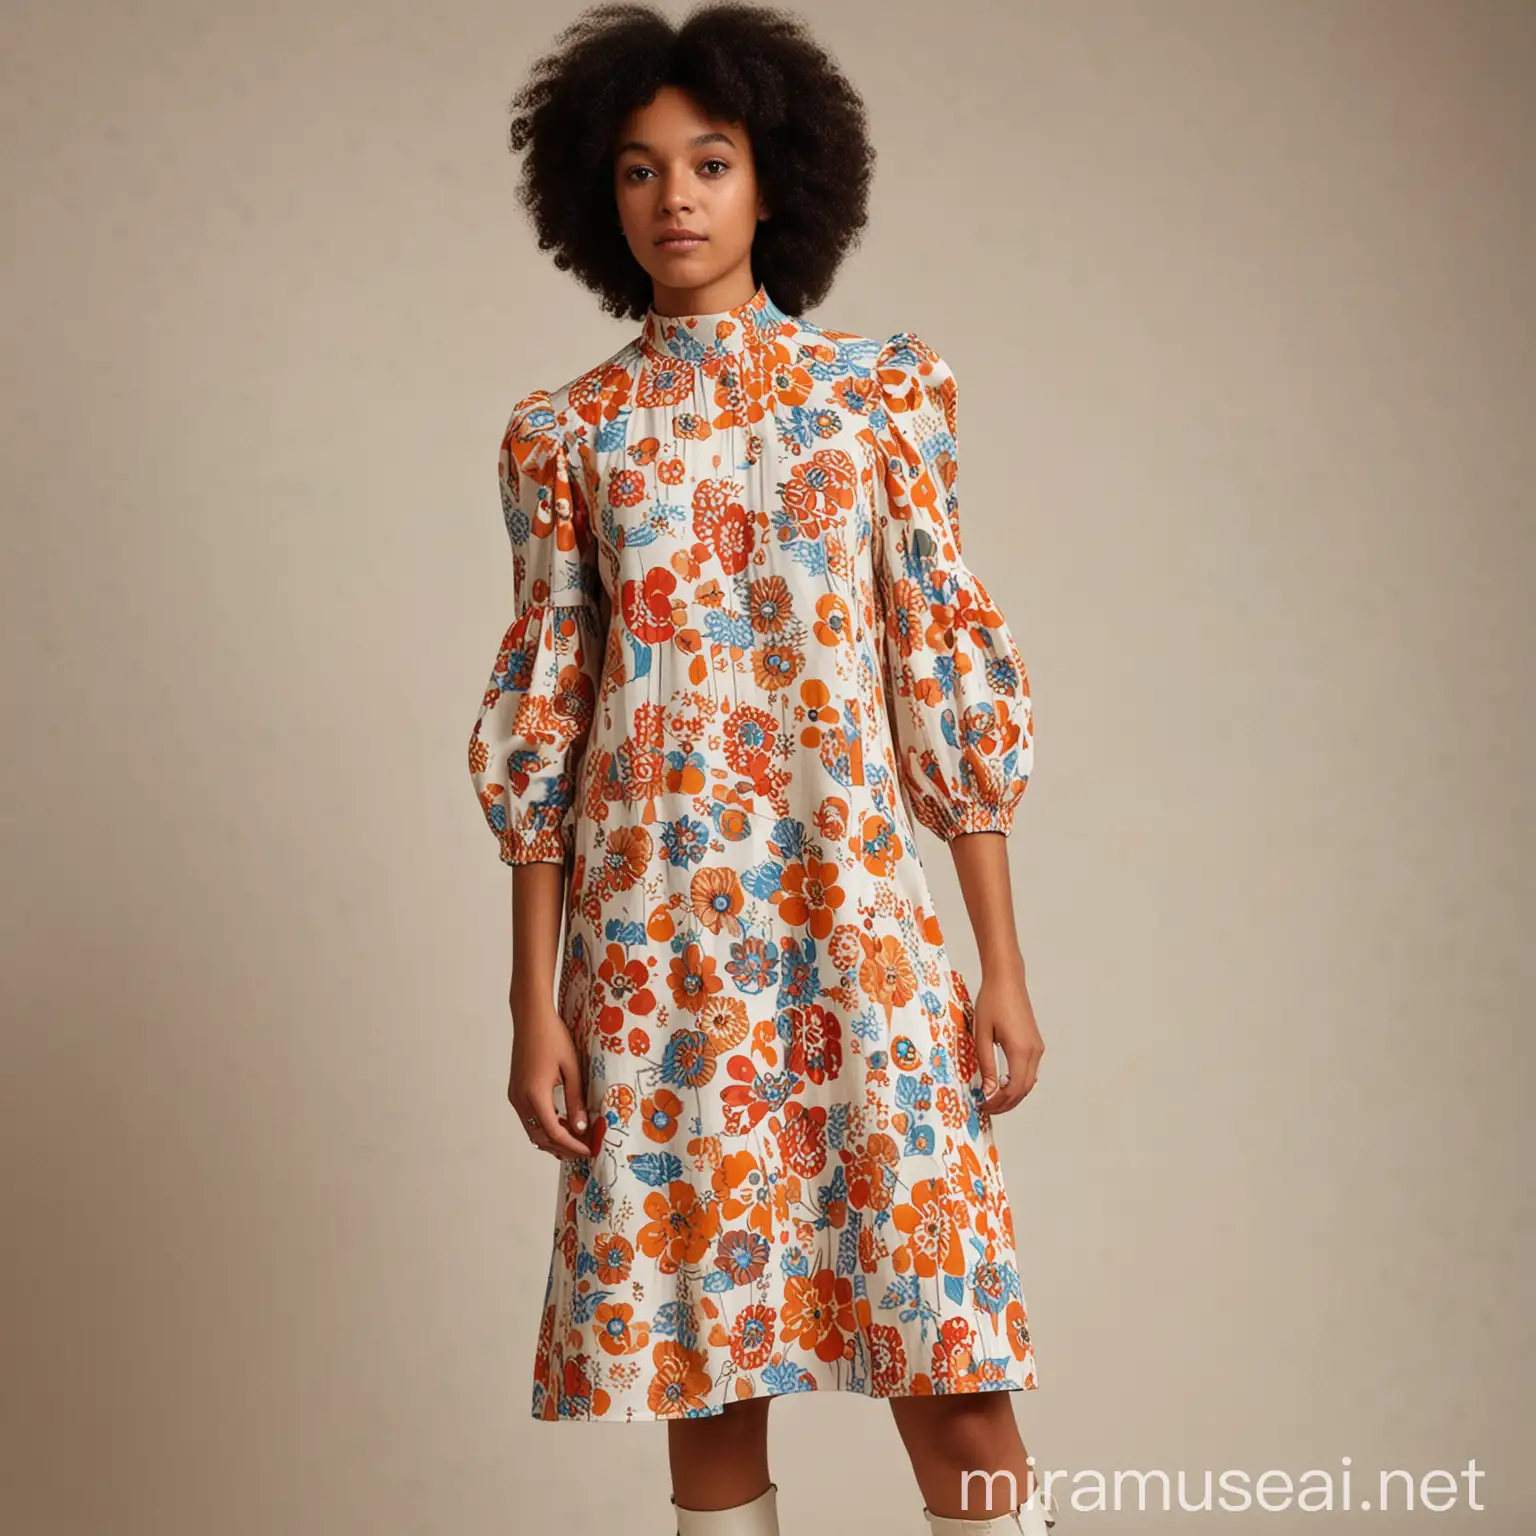 An a line 70s summer dress made out of cotton.  Mid length to the knee. With extra puffy sleeves to the elbow. round neck. On a mixed race model